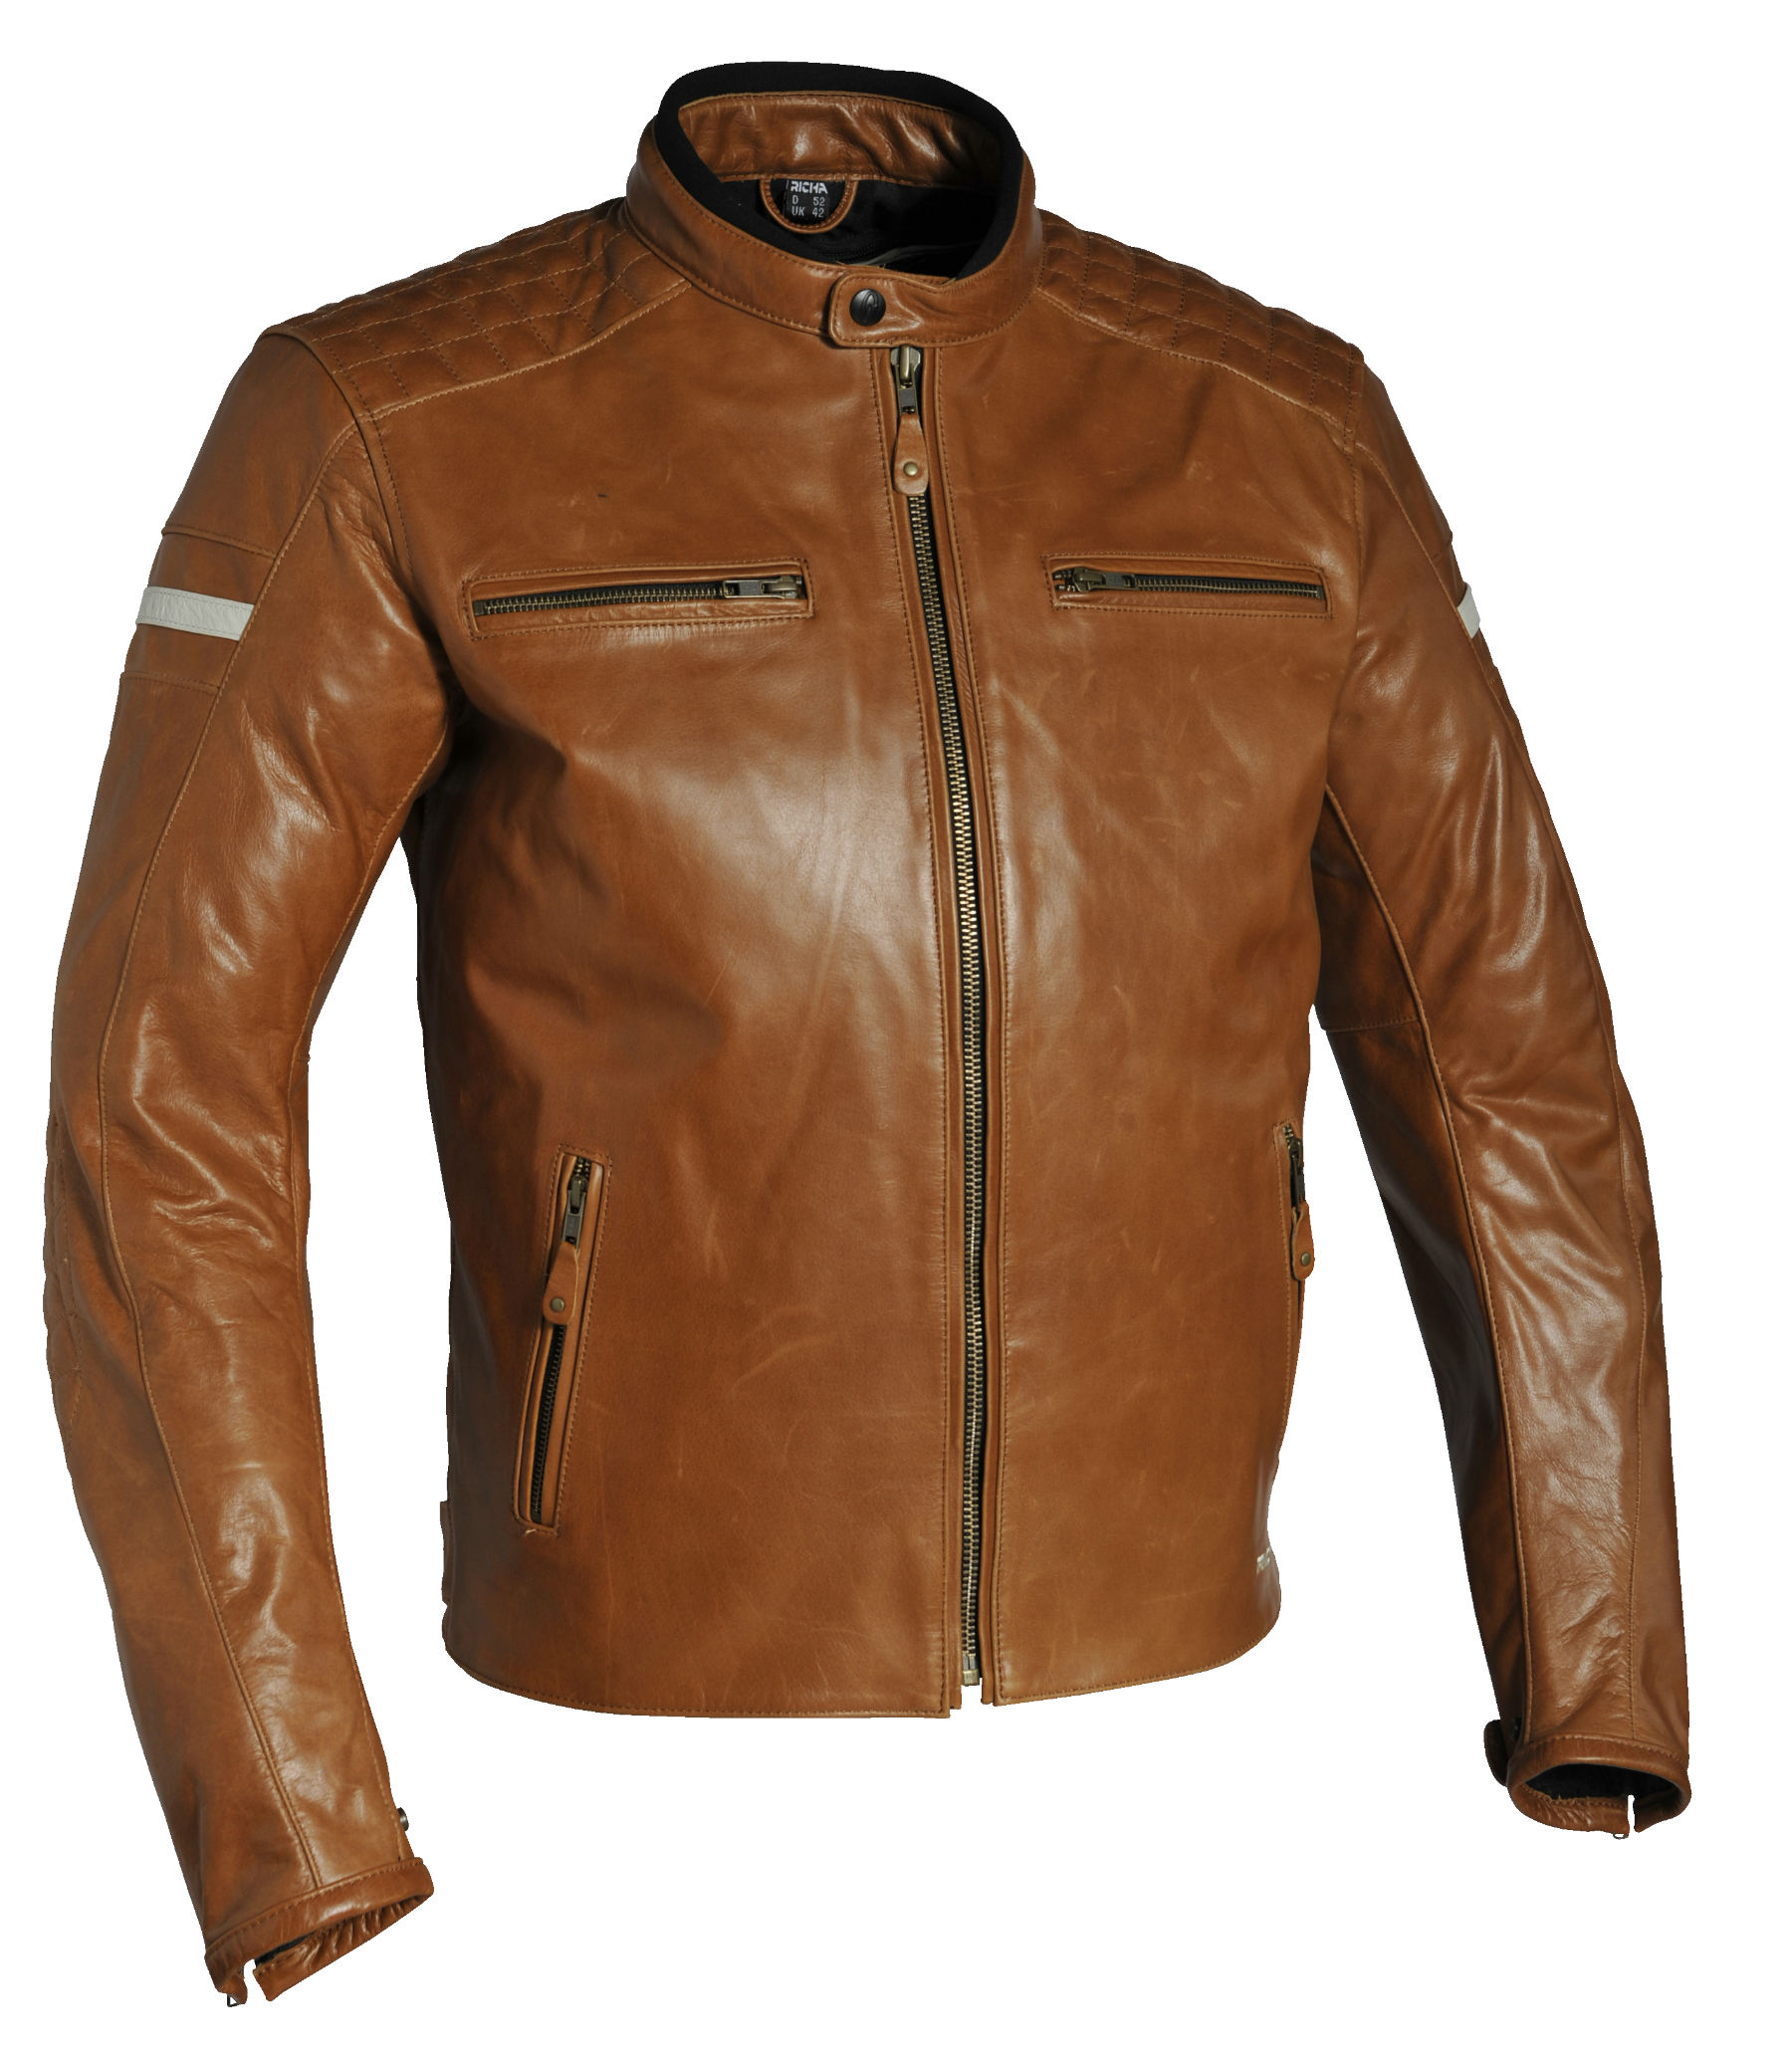 First look: Richa Daytona leather jacket review